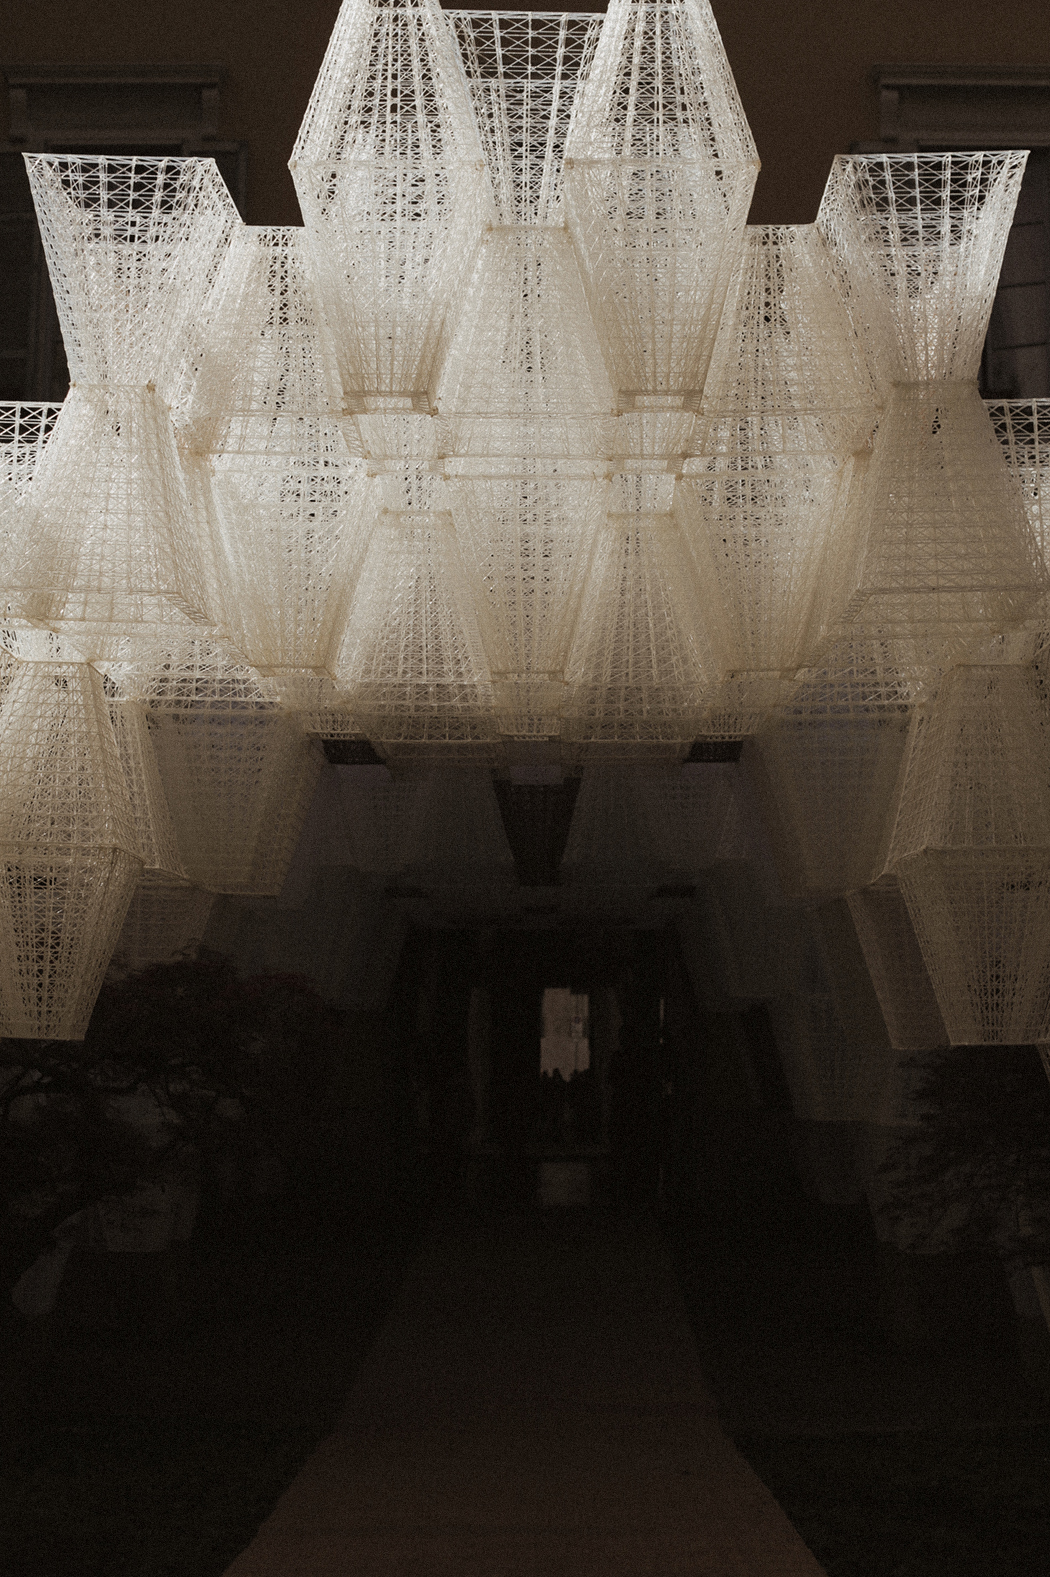 COS presents 'Conifera' - An Installation by Architect Mamou-Mani. By Fiona Dinkelbach